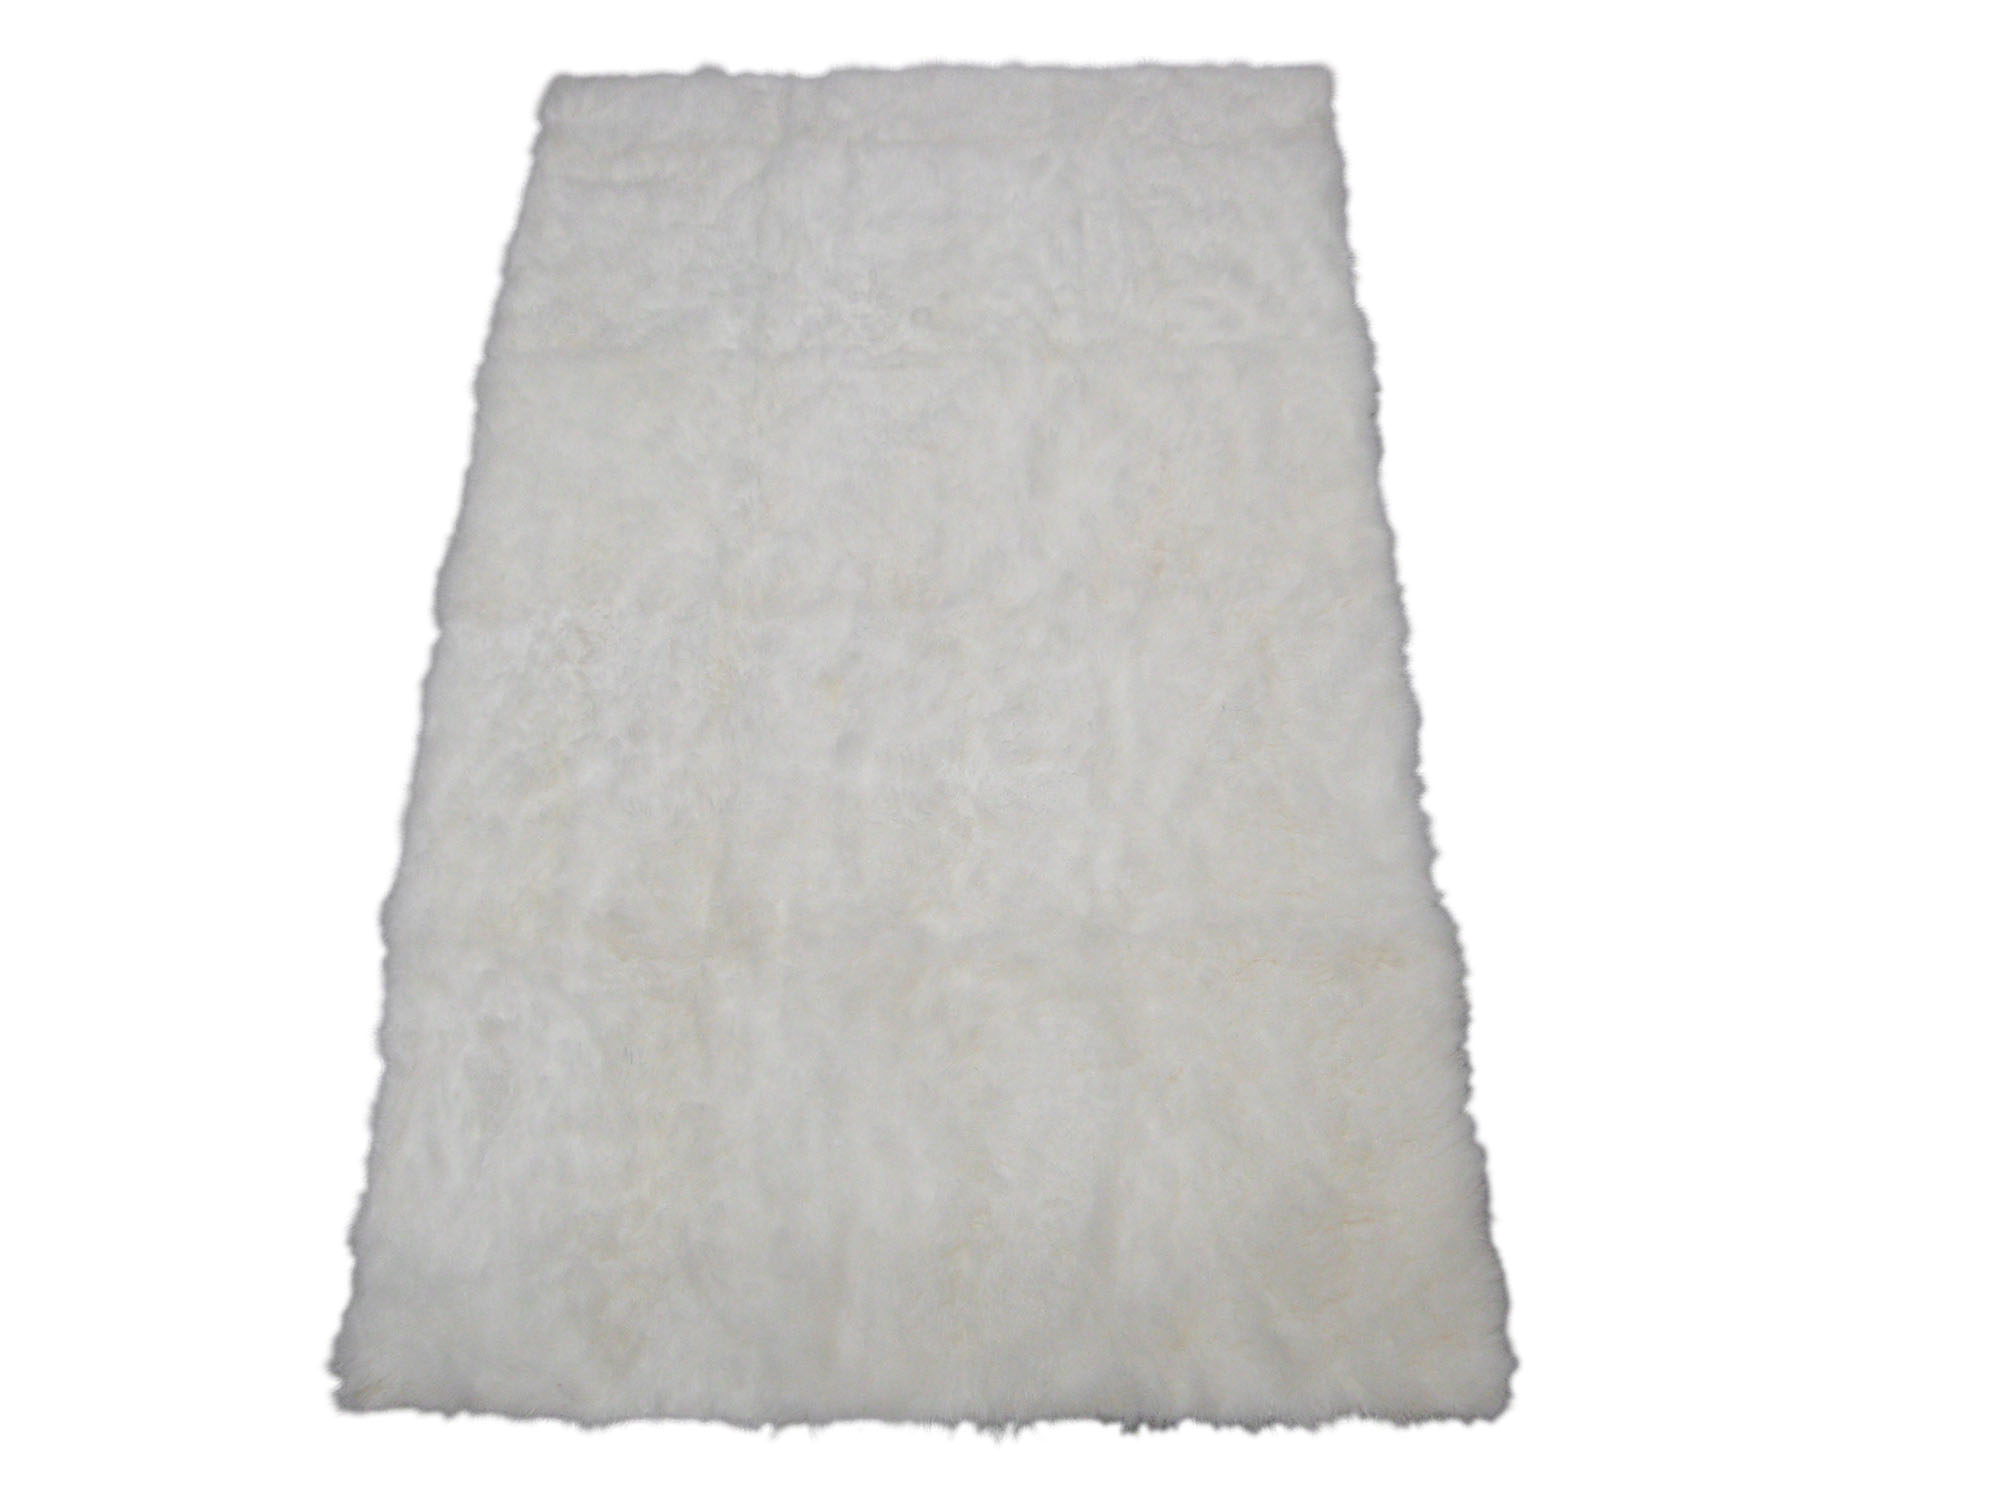 Cashmere Goat Rug: Natural White (Brightened): Gallery Item - 1268-A050-G01EW (Y2D)